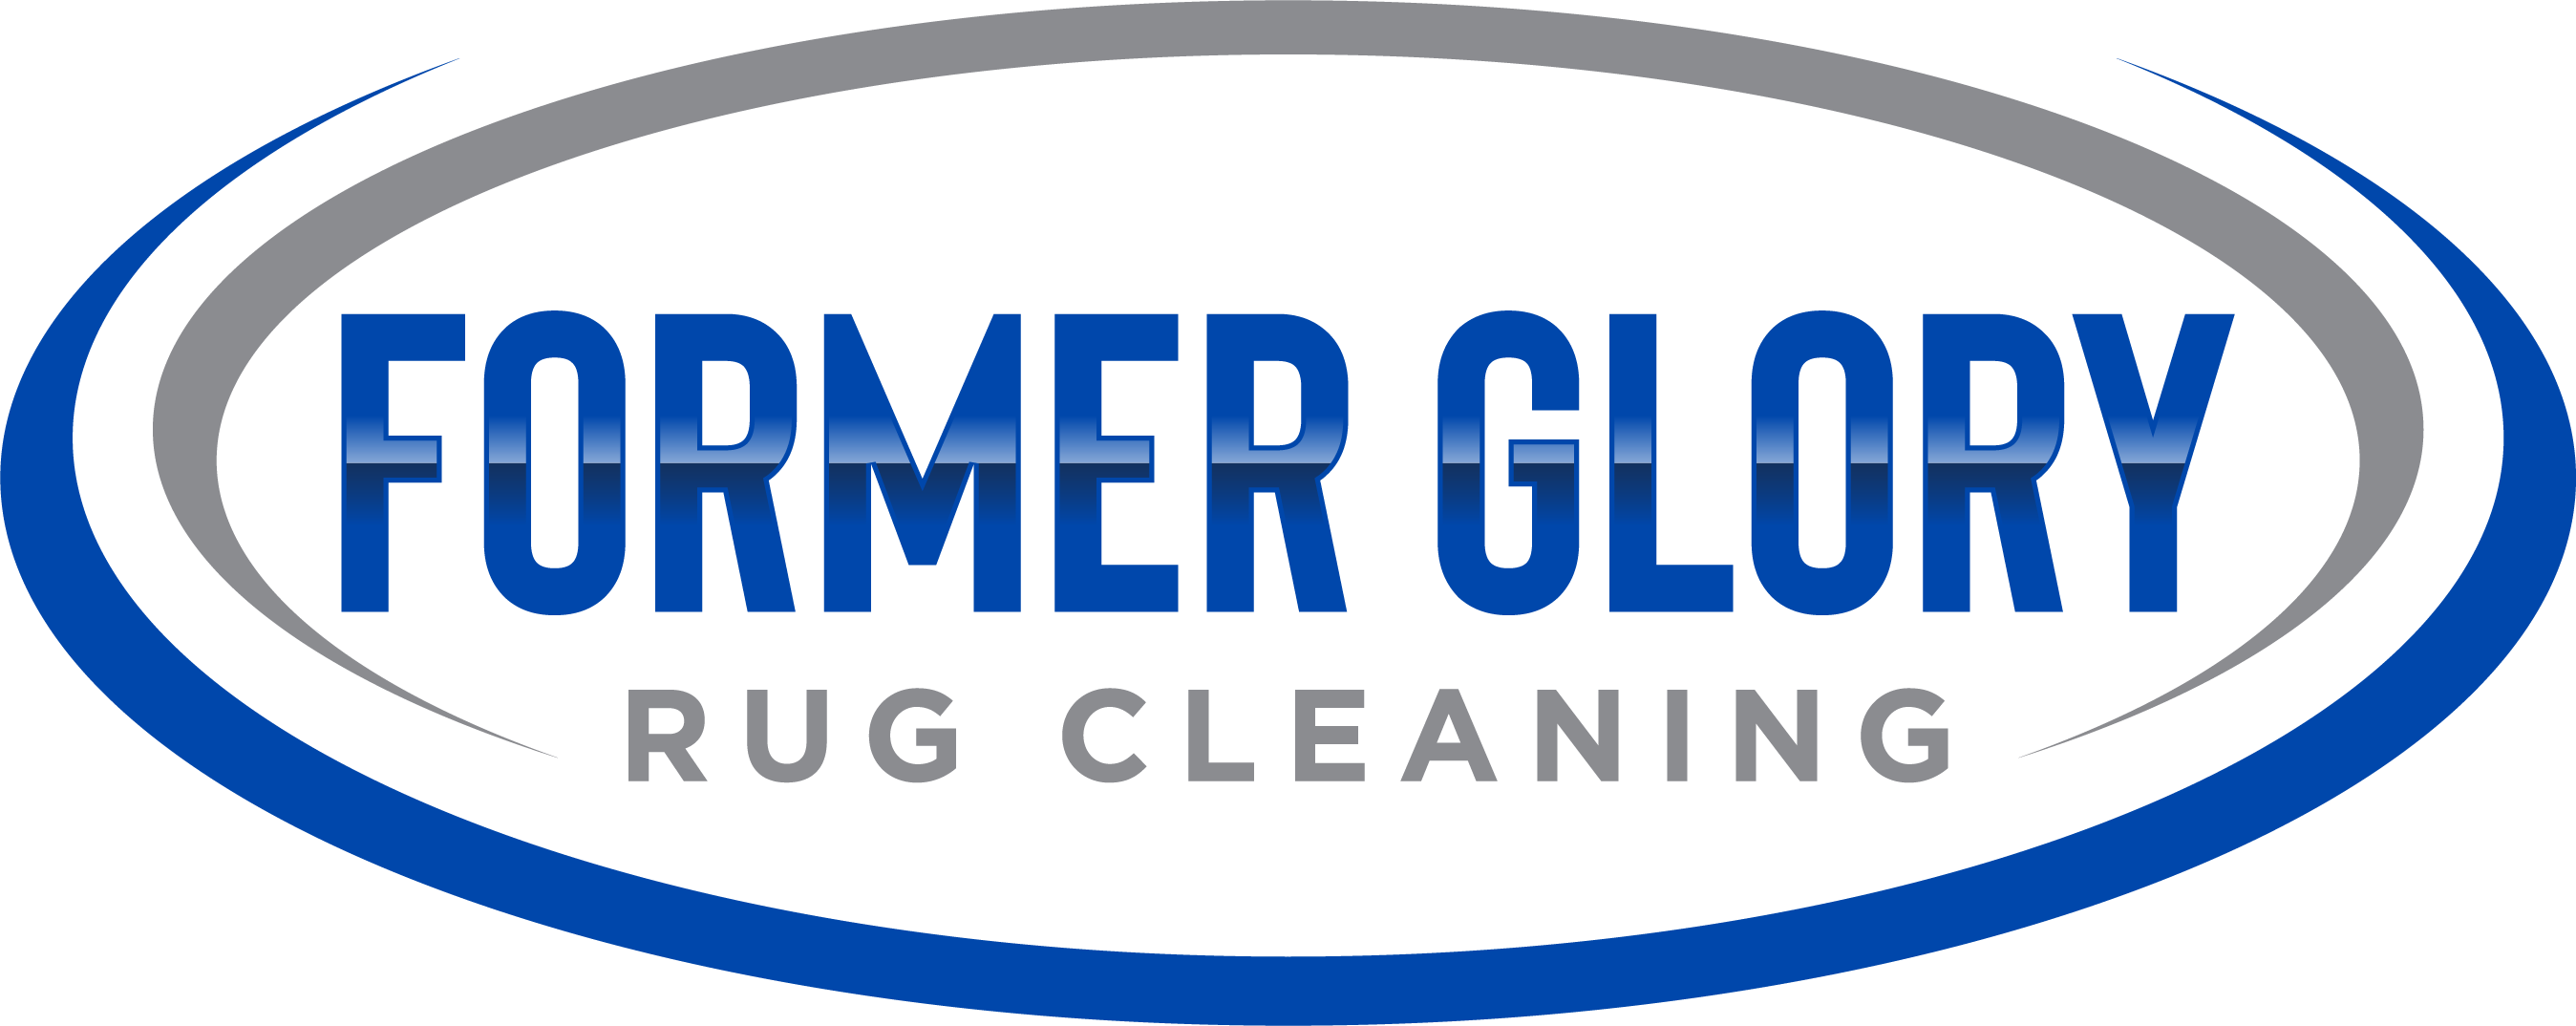 Former Glory Rug Cleaning Logo